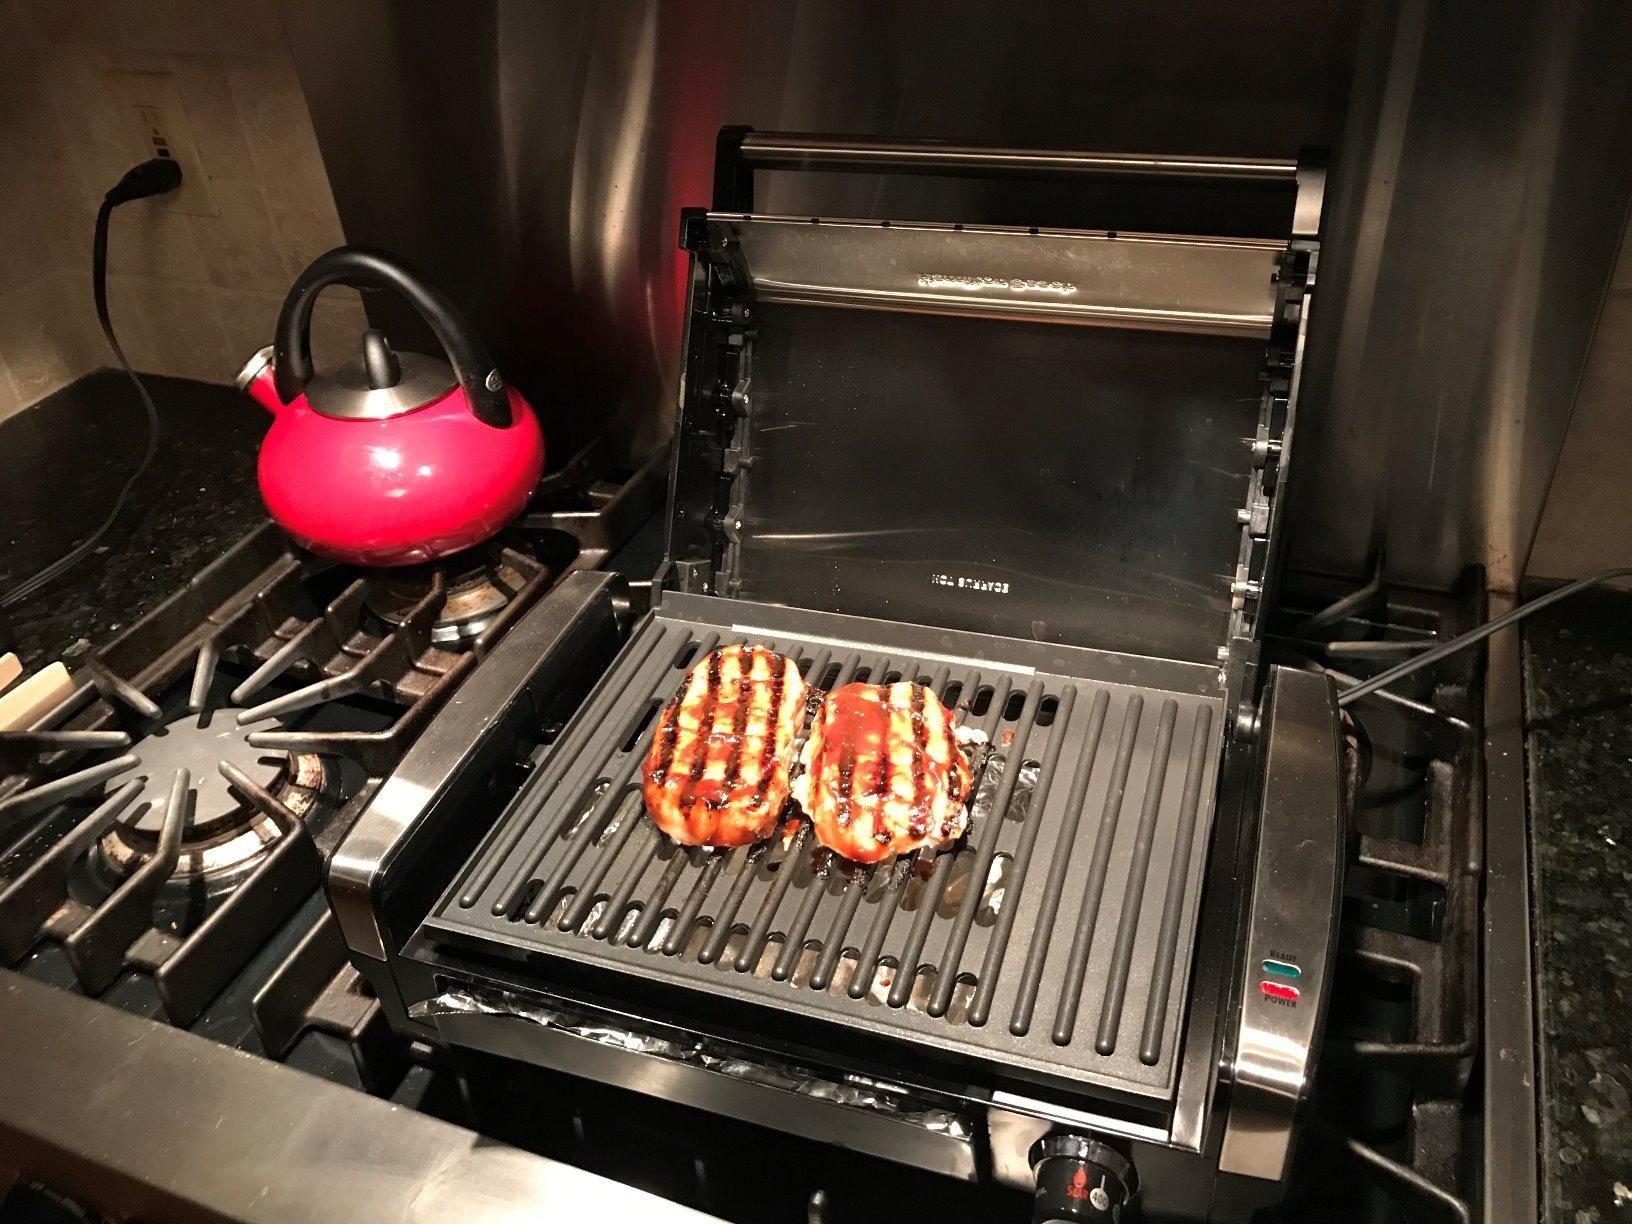 reviewer image of the grill on top of a stove with two piece of meat grilling on top and a red kettle in the background